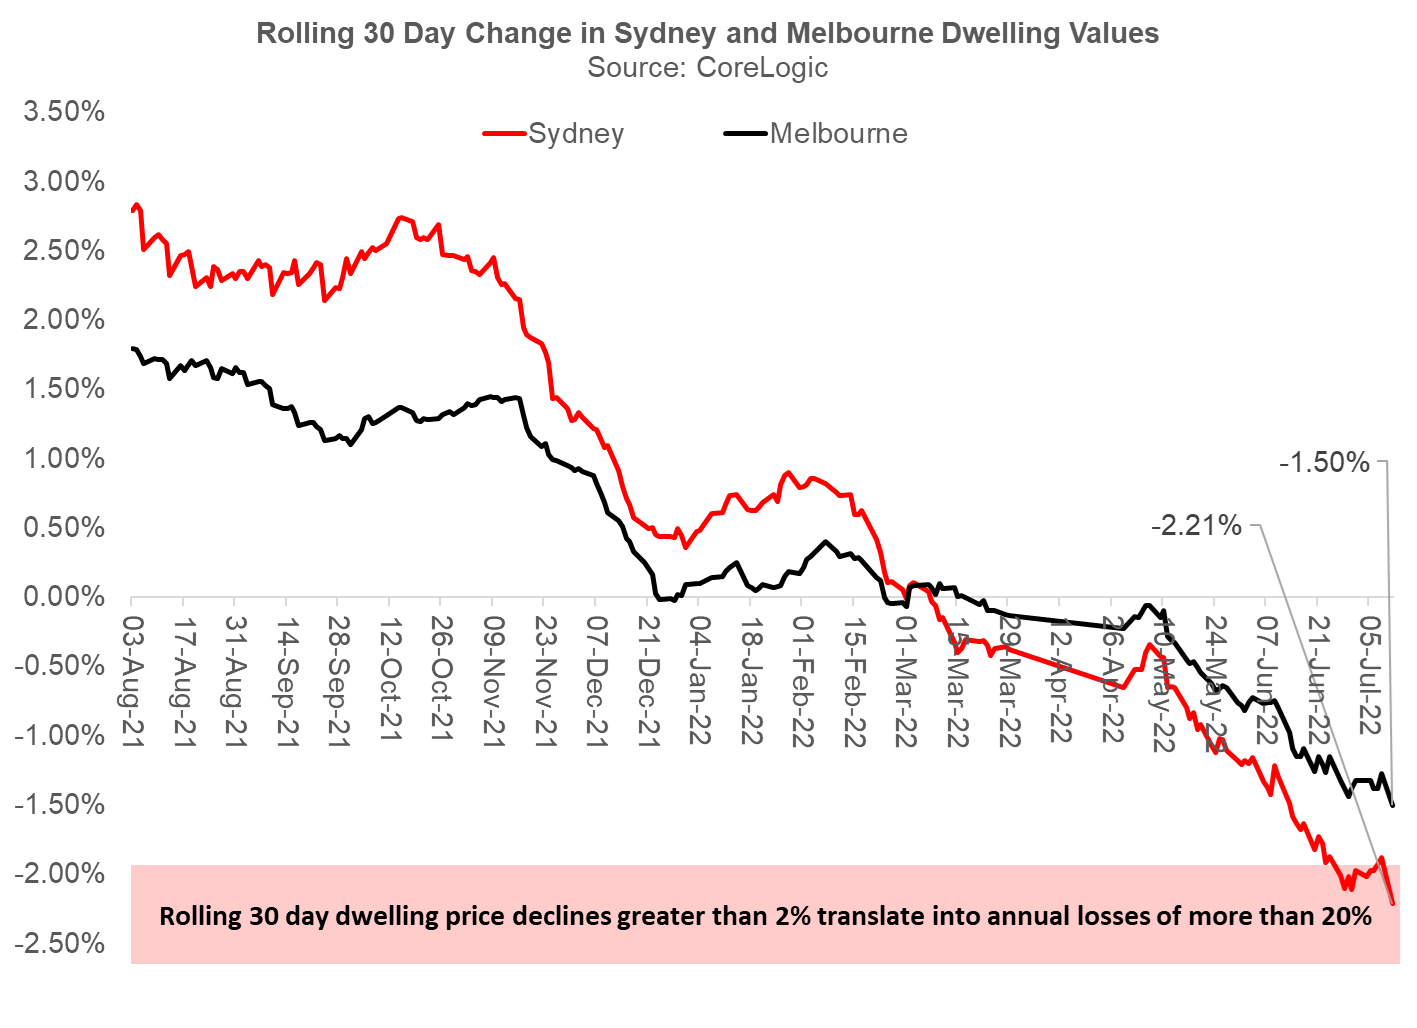 Sydney house prices are tracking to decline by more than 20%